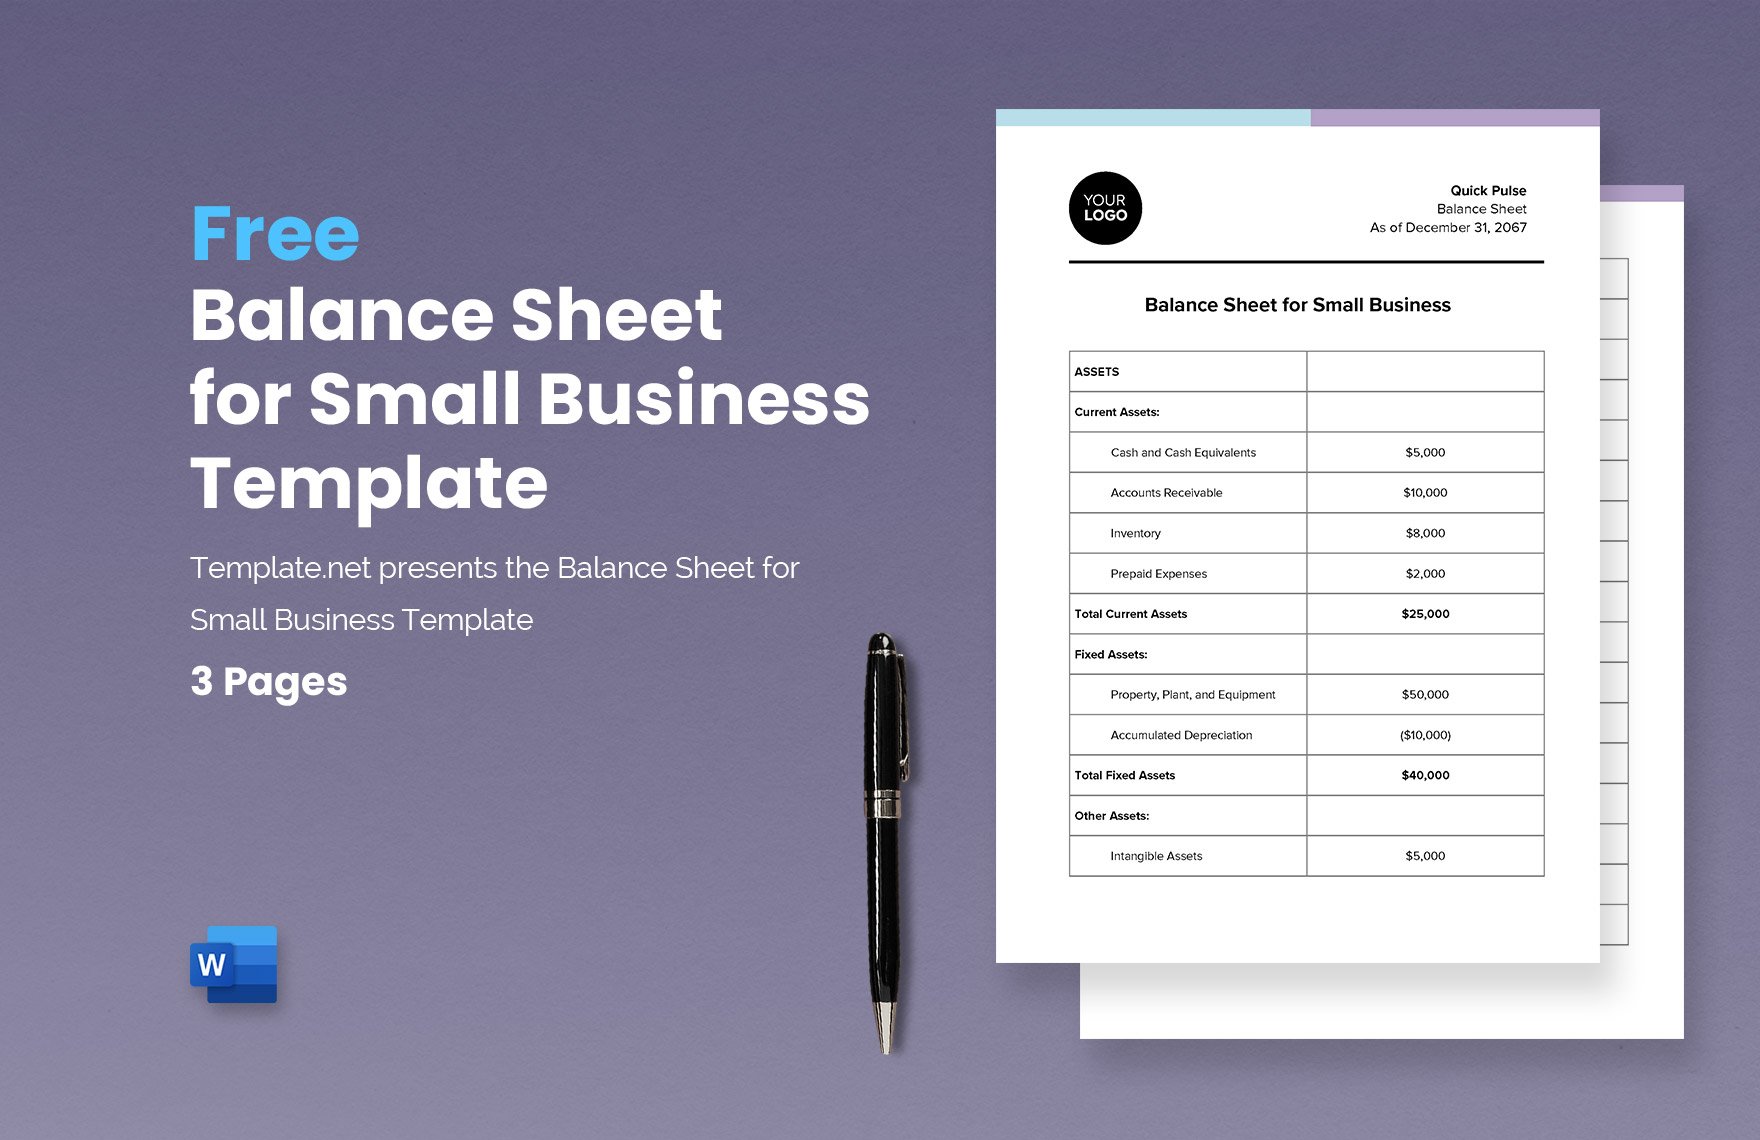 Free Balance Sheet for Small Business Template in Word